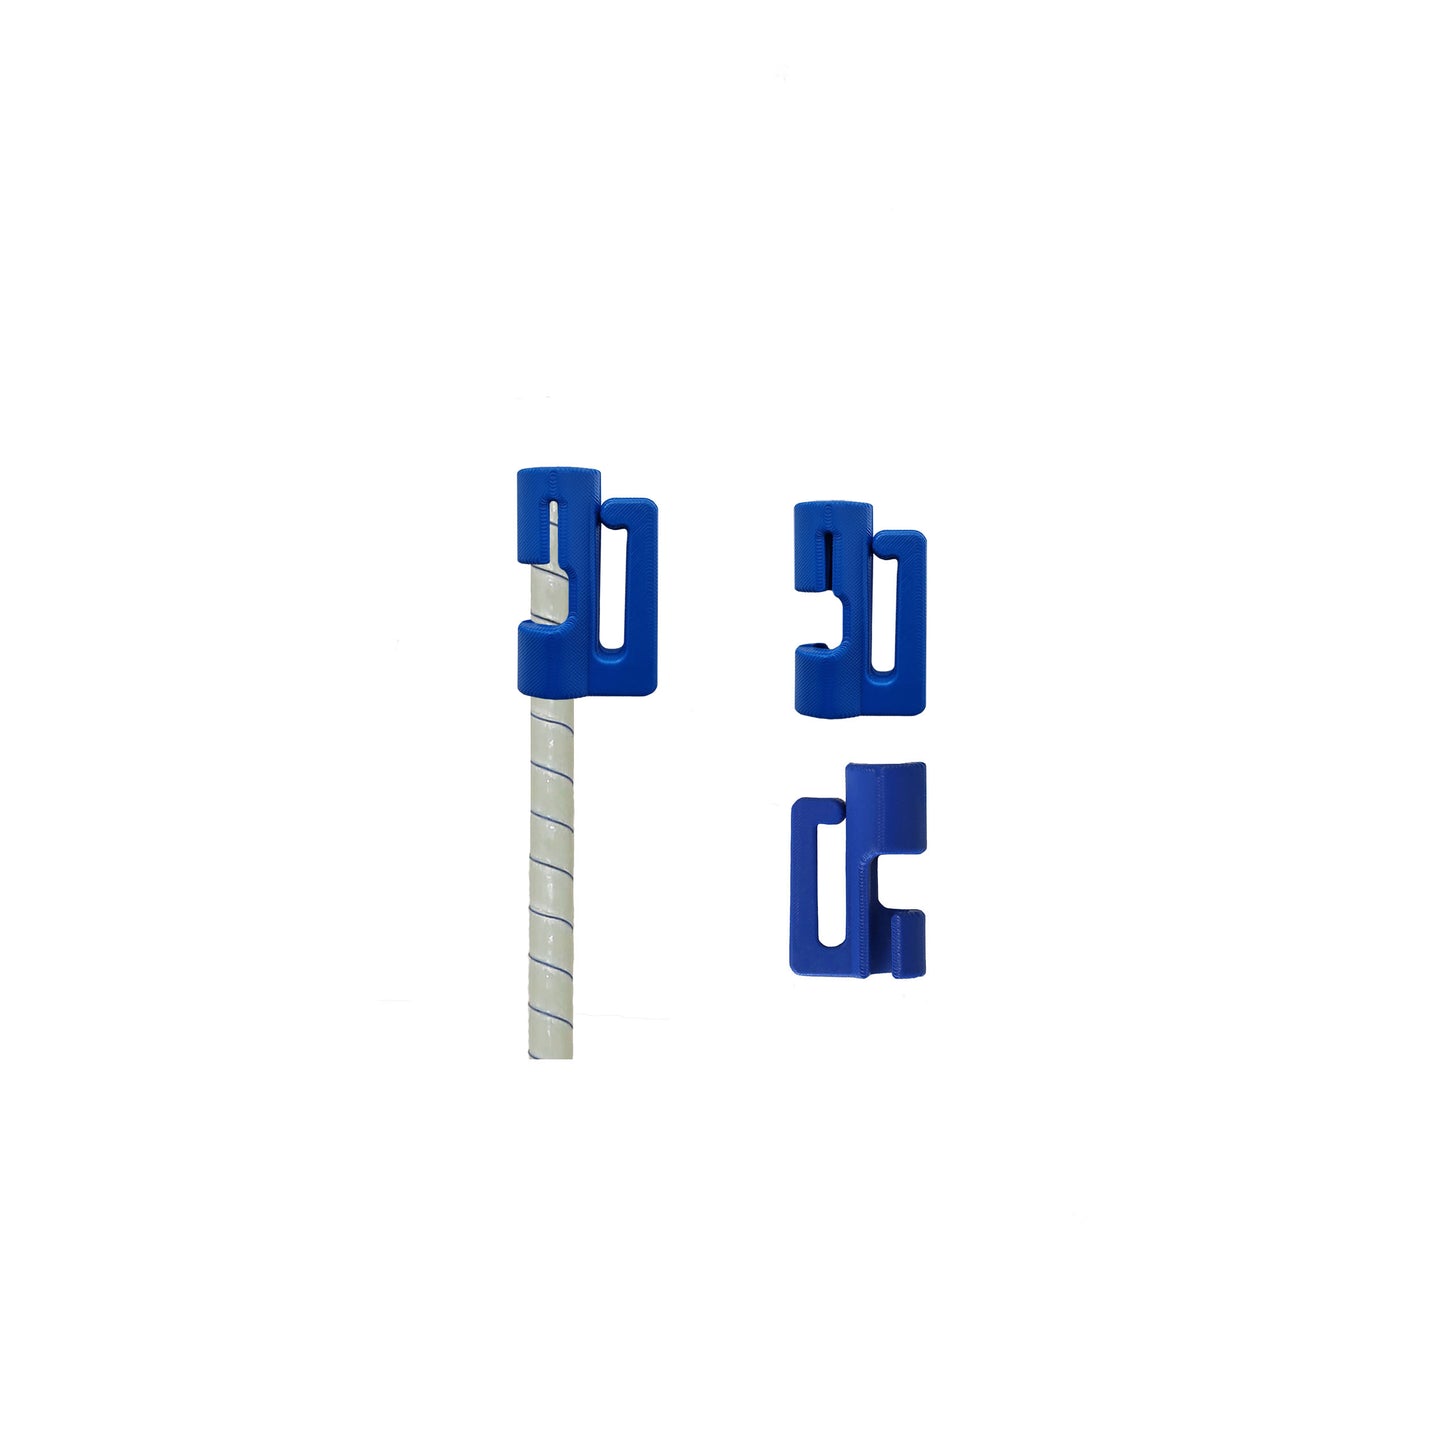 Top clip for wires and tape (D10-12)